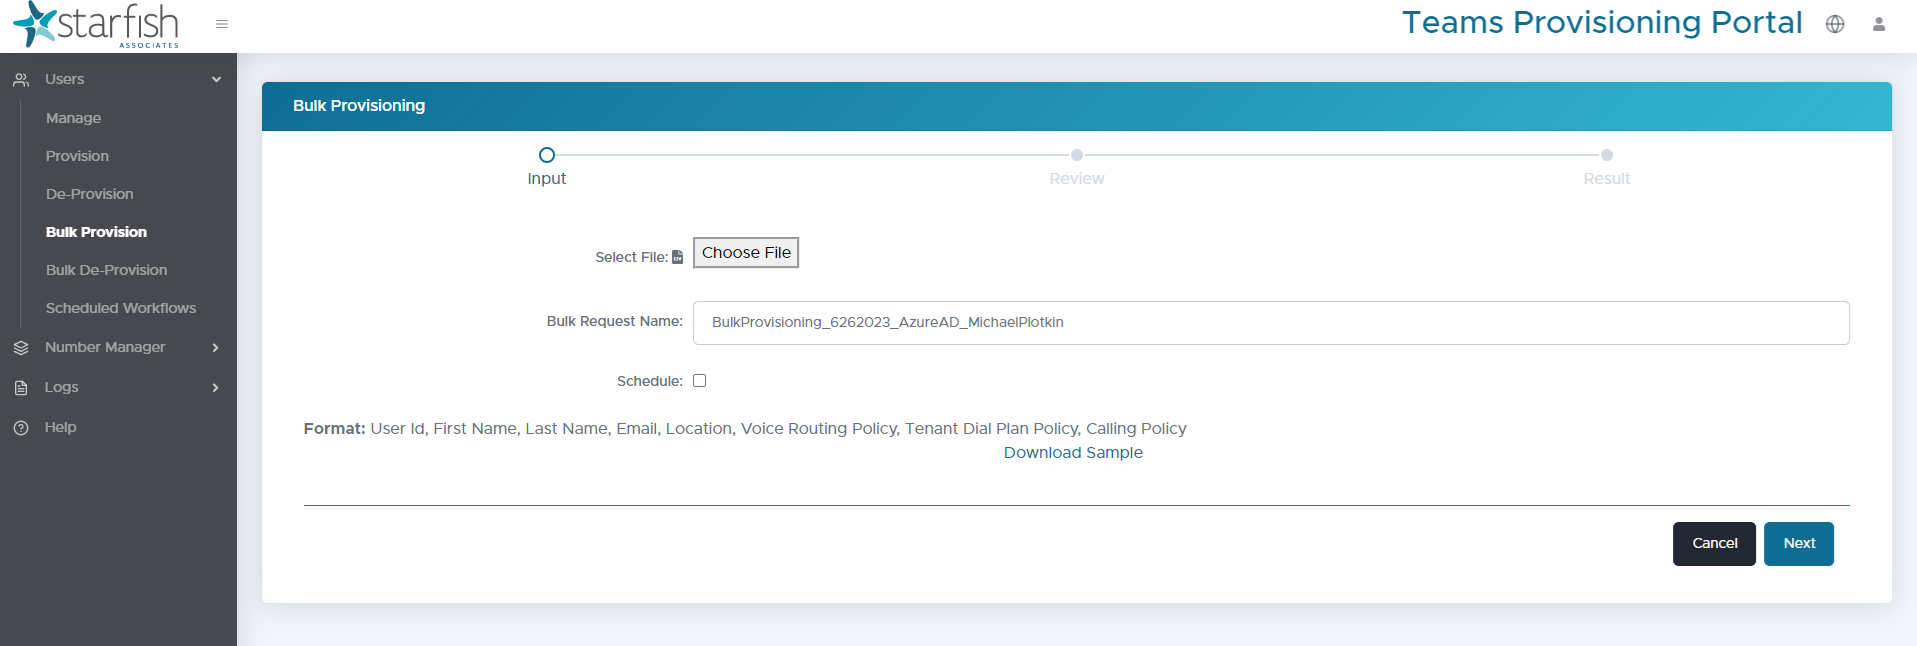 Provisioning Manager for Teams Bulk Provisioning